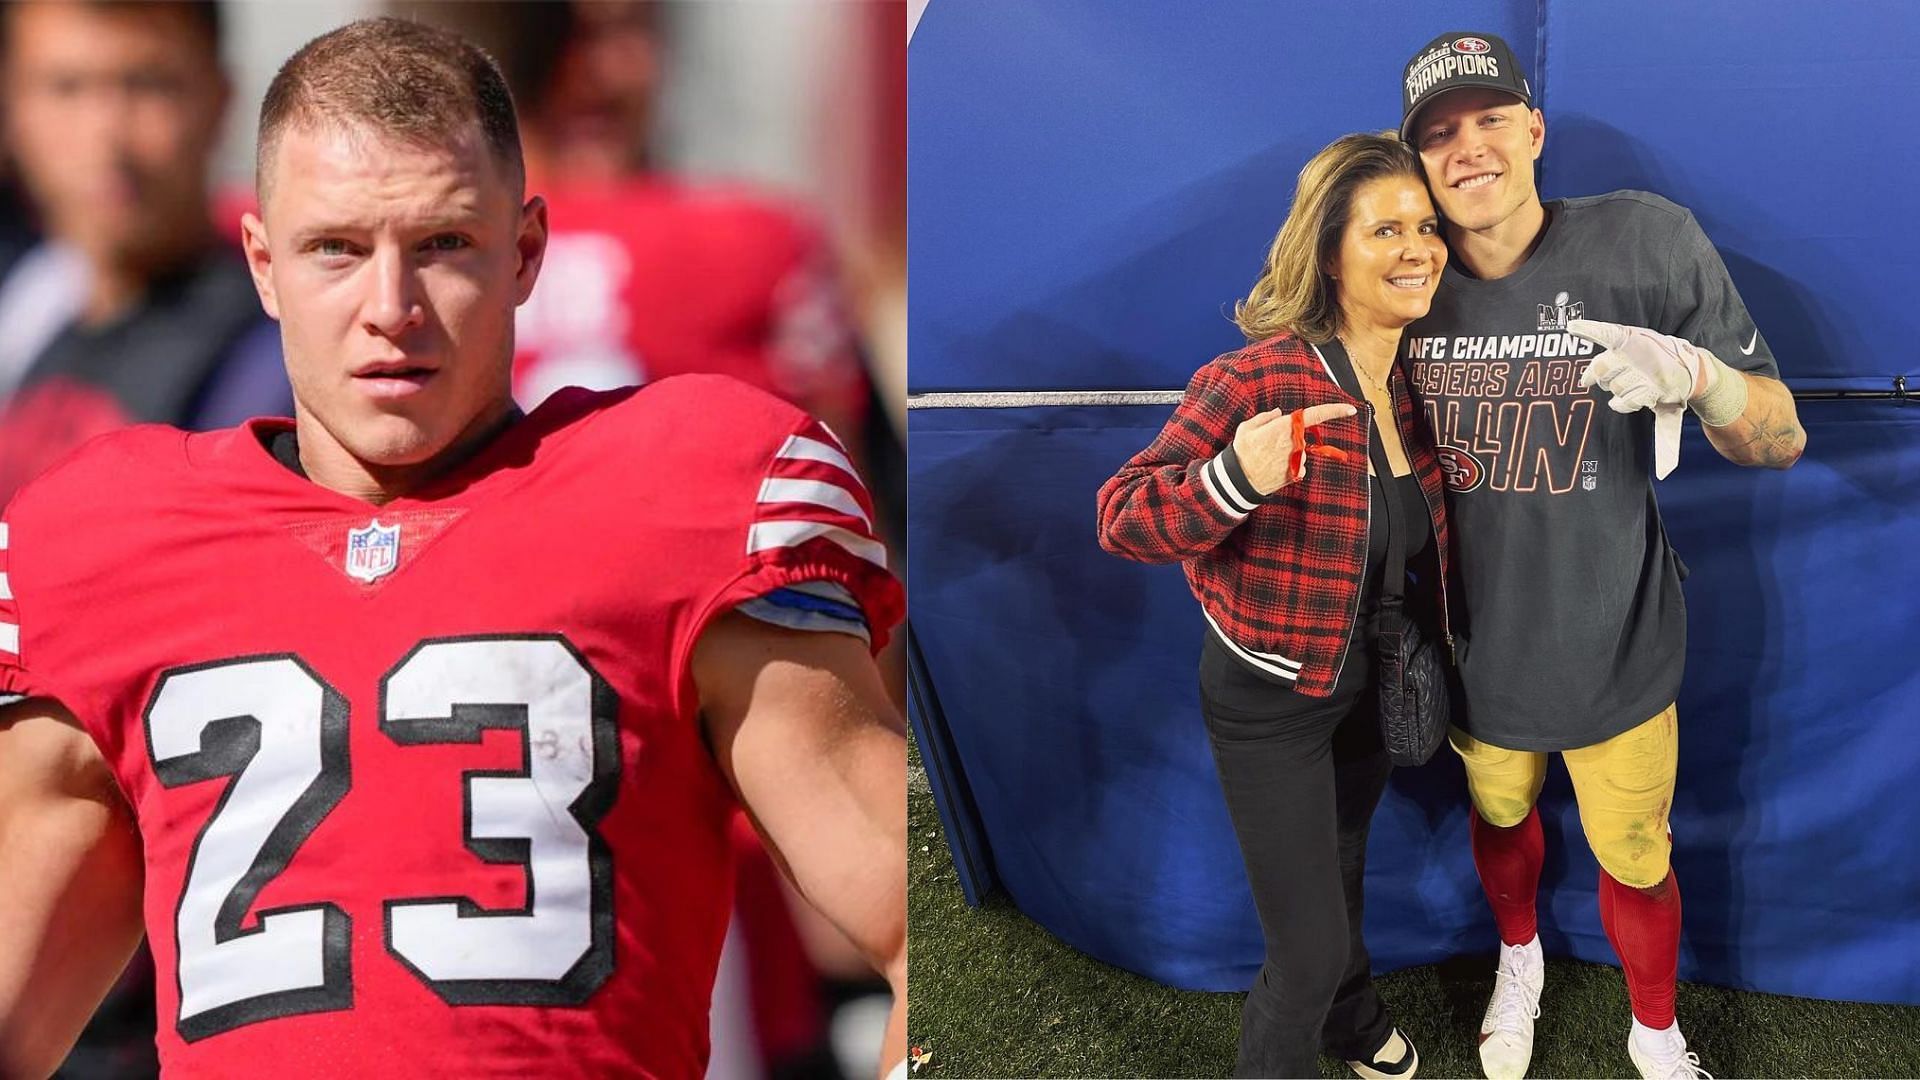 &ldquo;It was awful, I was crying&rdquo;: Christian McCaffrey&rsquo;s mom Lisa shares emotional experience of 49ers&rsquo; first-half meltdown in NFCCG